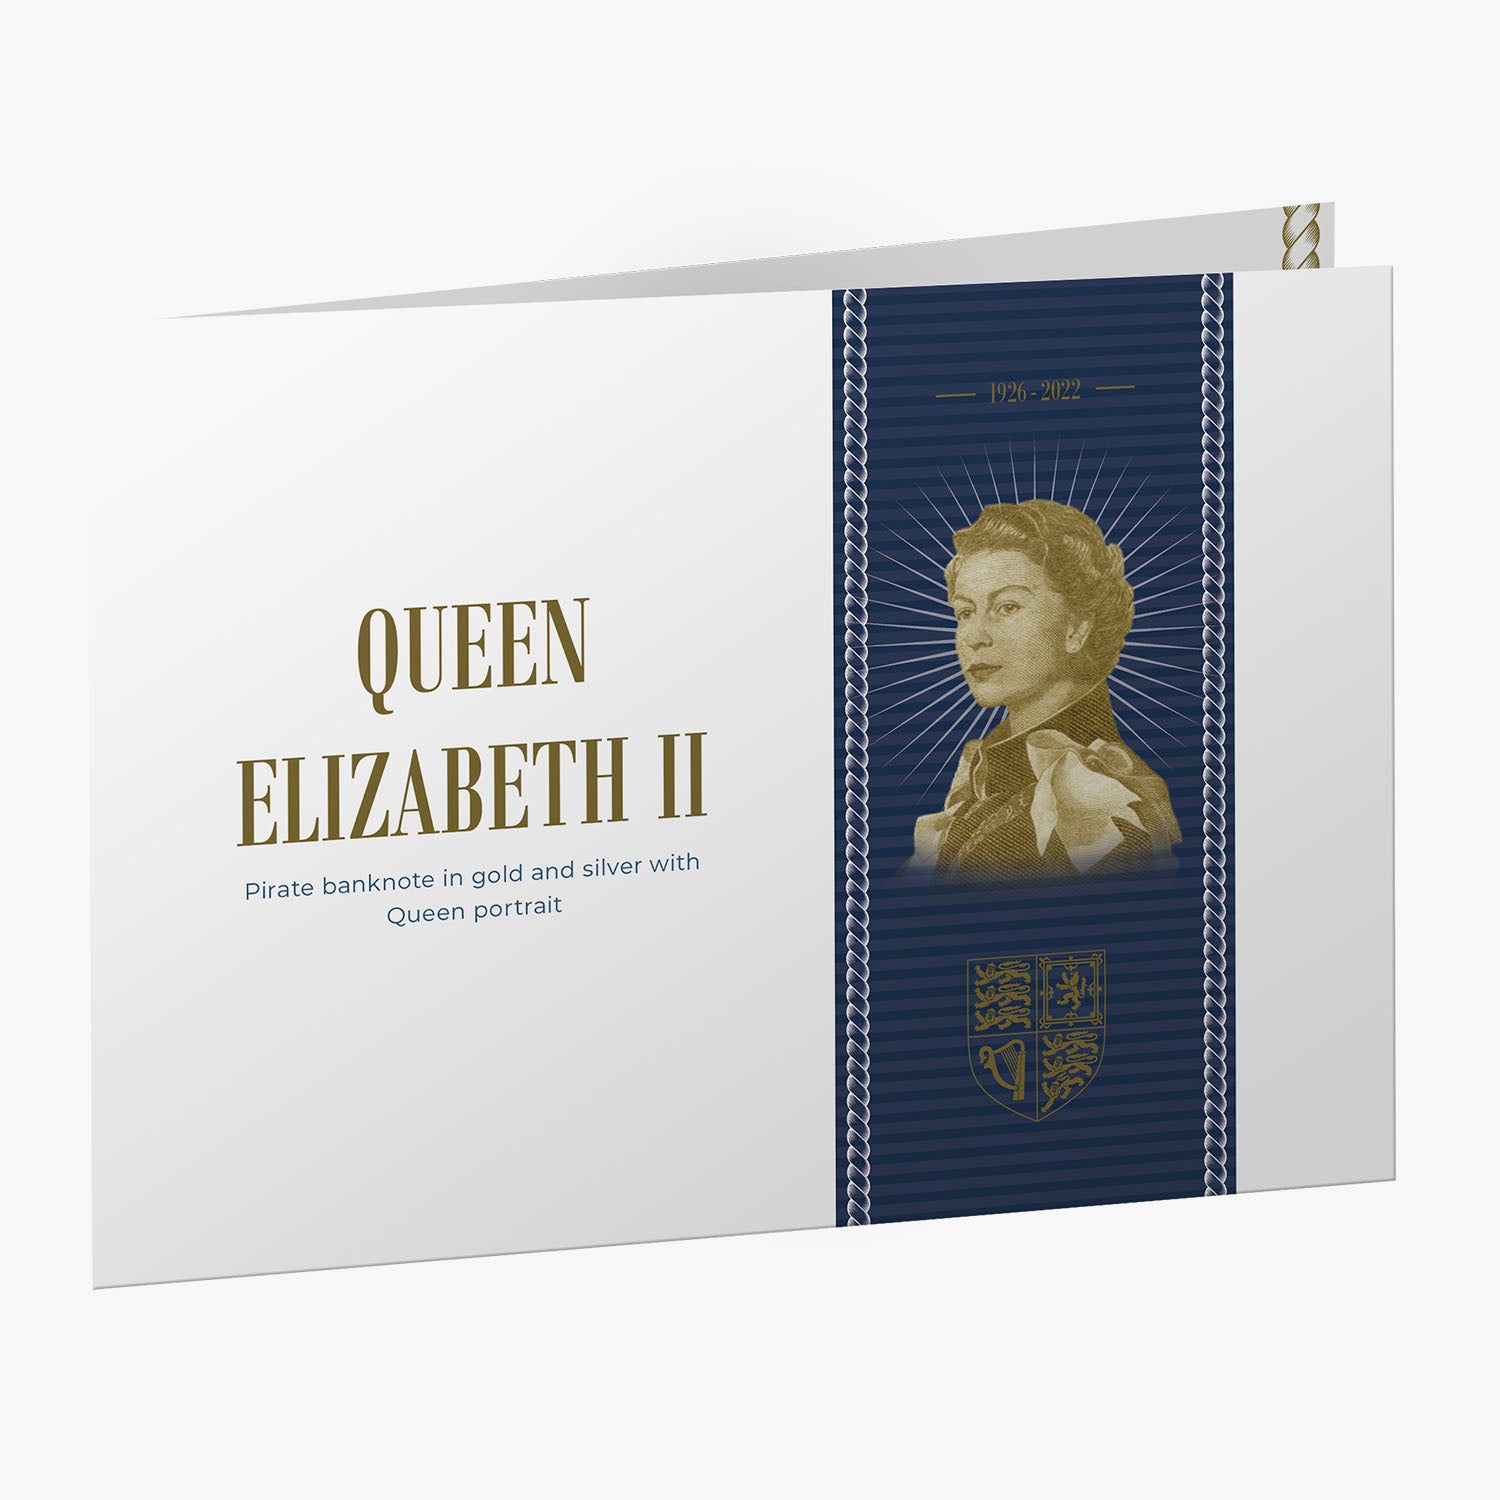 Her Majesty Queen Elizabeth II Royal Gold and Silver Banknote